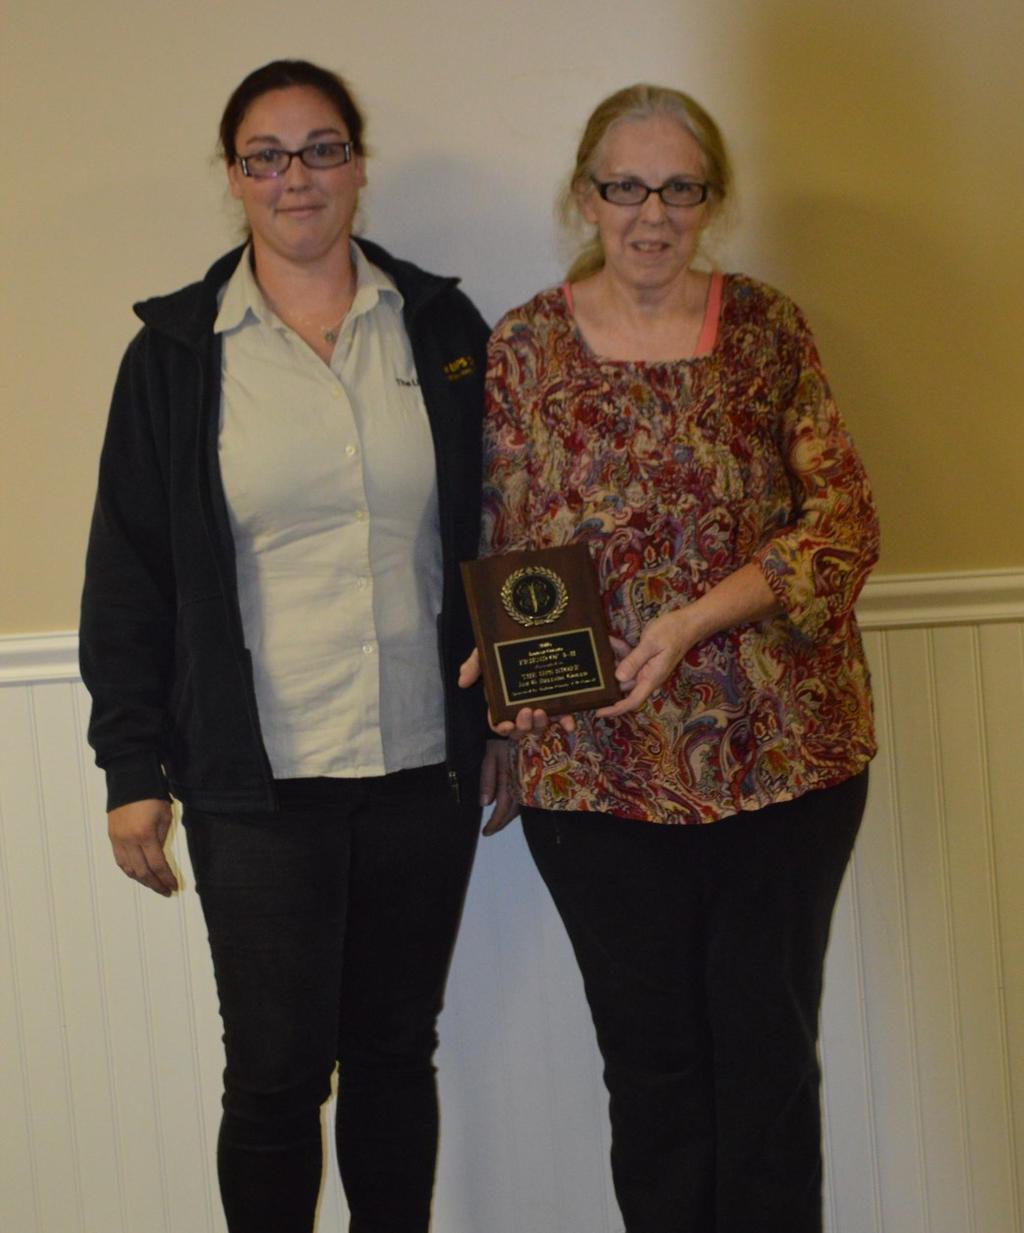 Friend of 4-H The Friend of 4-H Award recognizes a person or business that may not be a part of a 4-H club or committee but has made significant contributions to some aspect of the 4-H program in